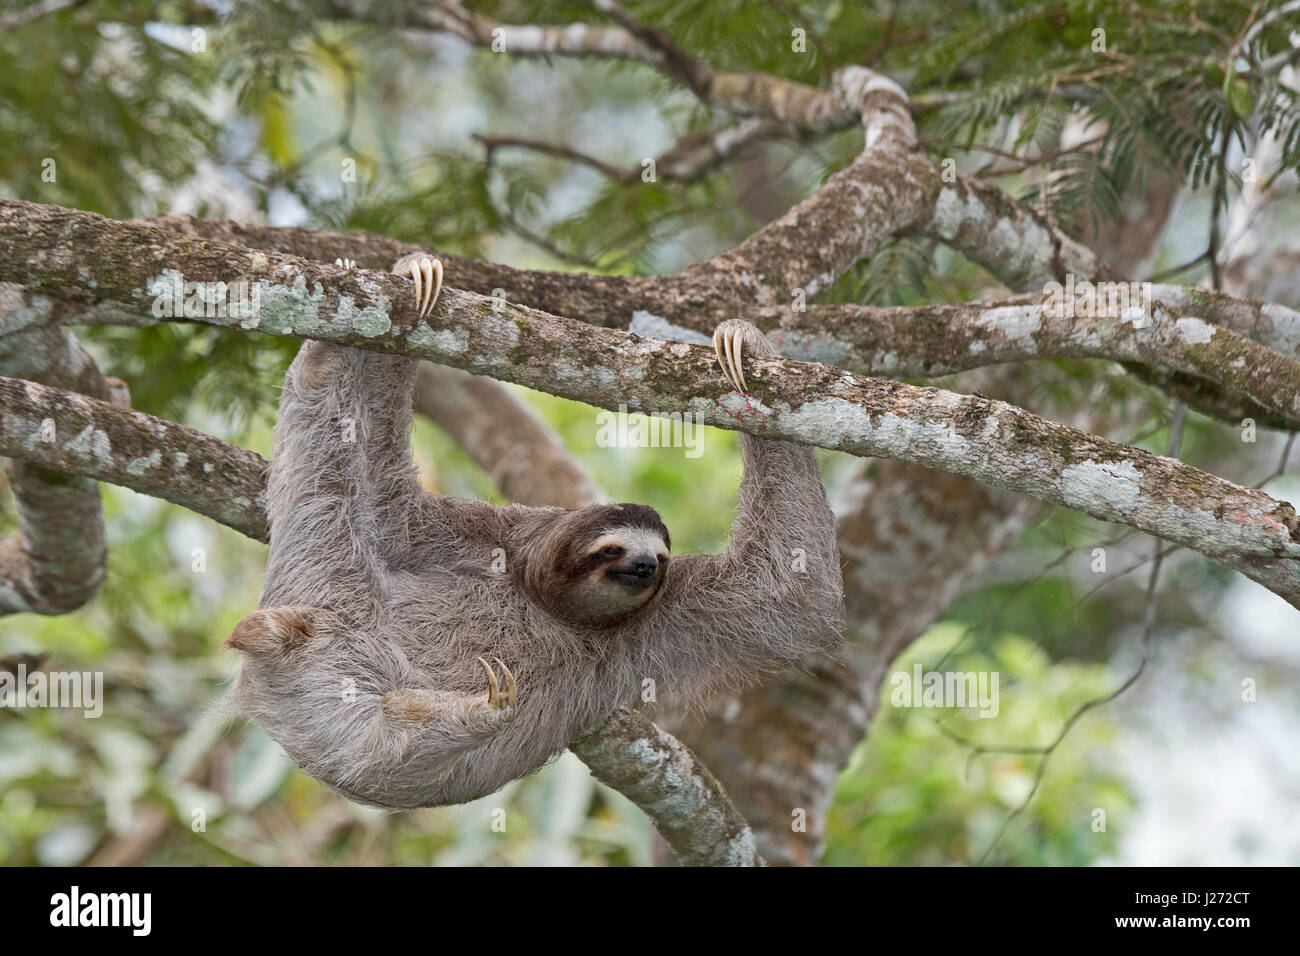 Brown-throated Sloth (Bradypus variegatus) de Trois-toed Sloth famille, femme Panama Banque D'Images